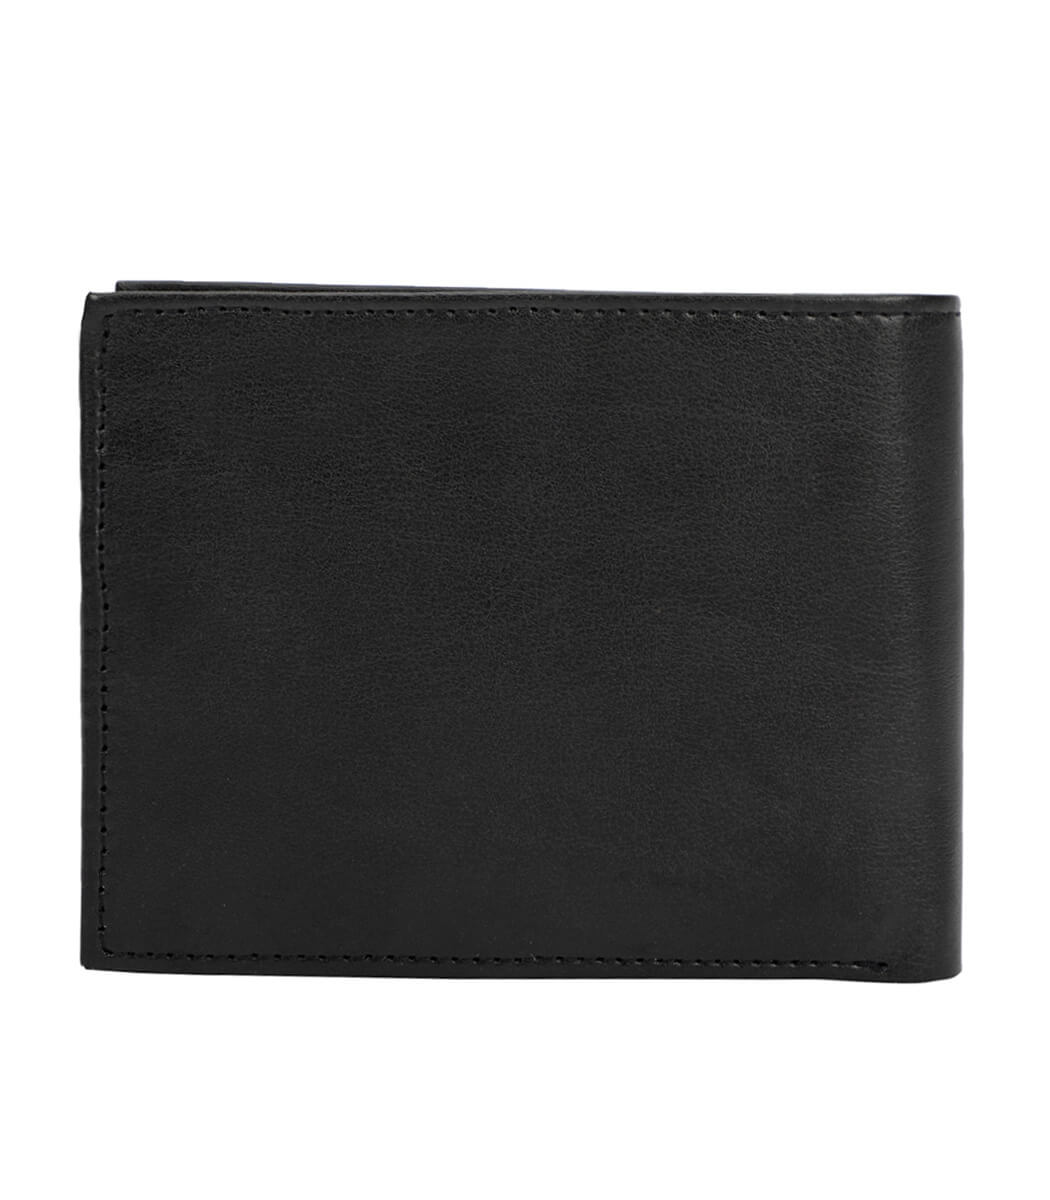 Unisex PU Leather Wallet, Black | PW1 - SWISS MILITARY CONSUMER GOODS ...